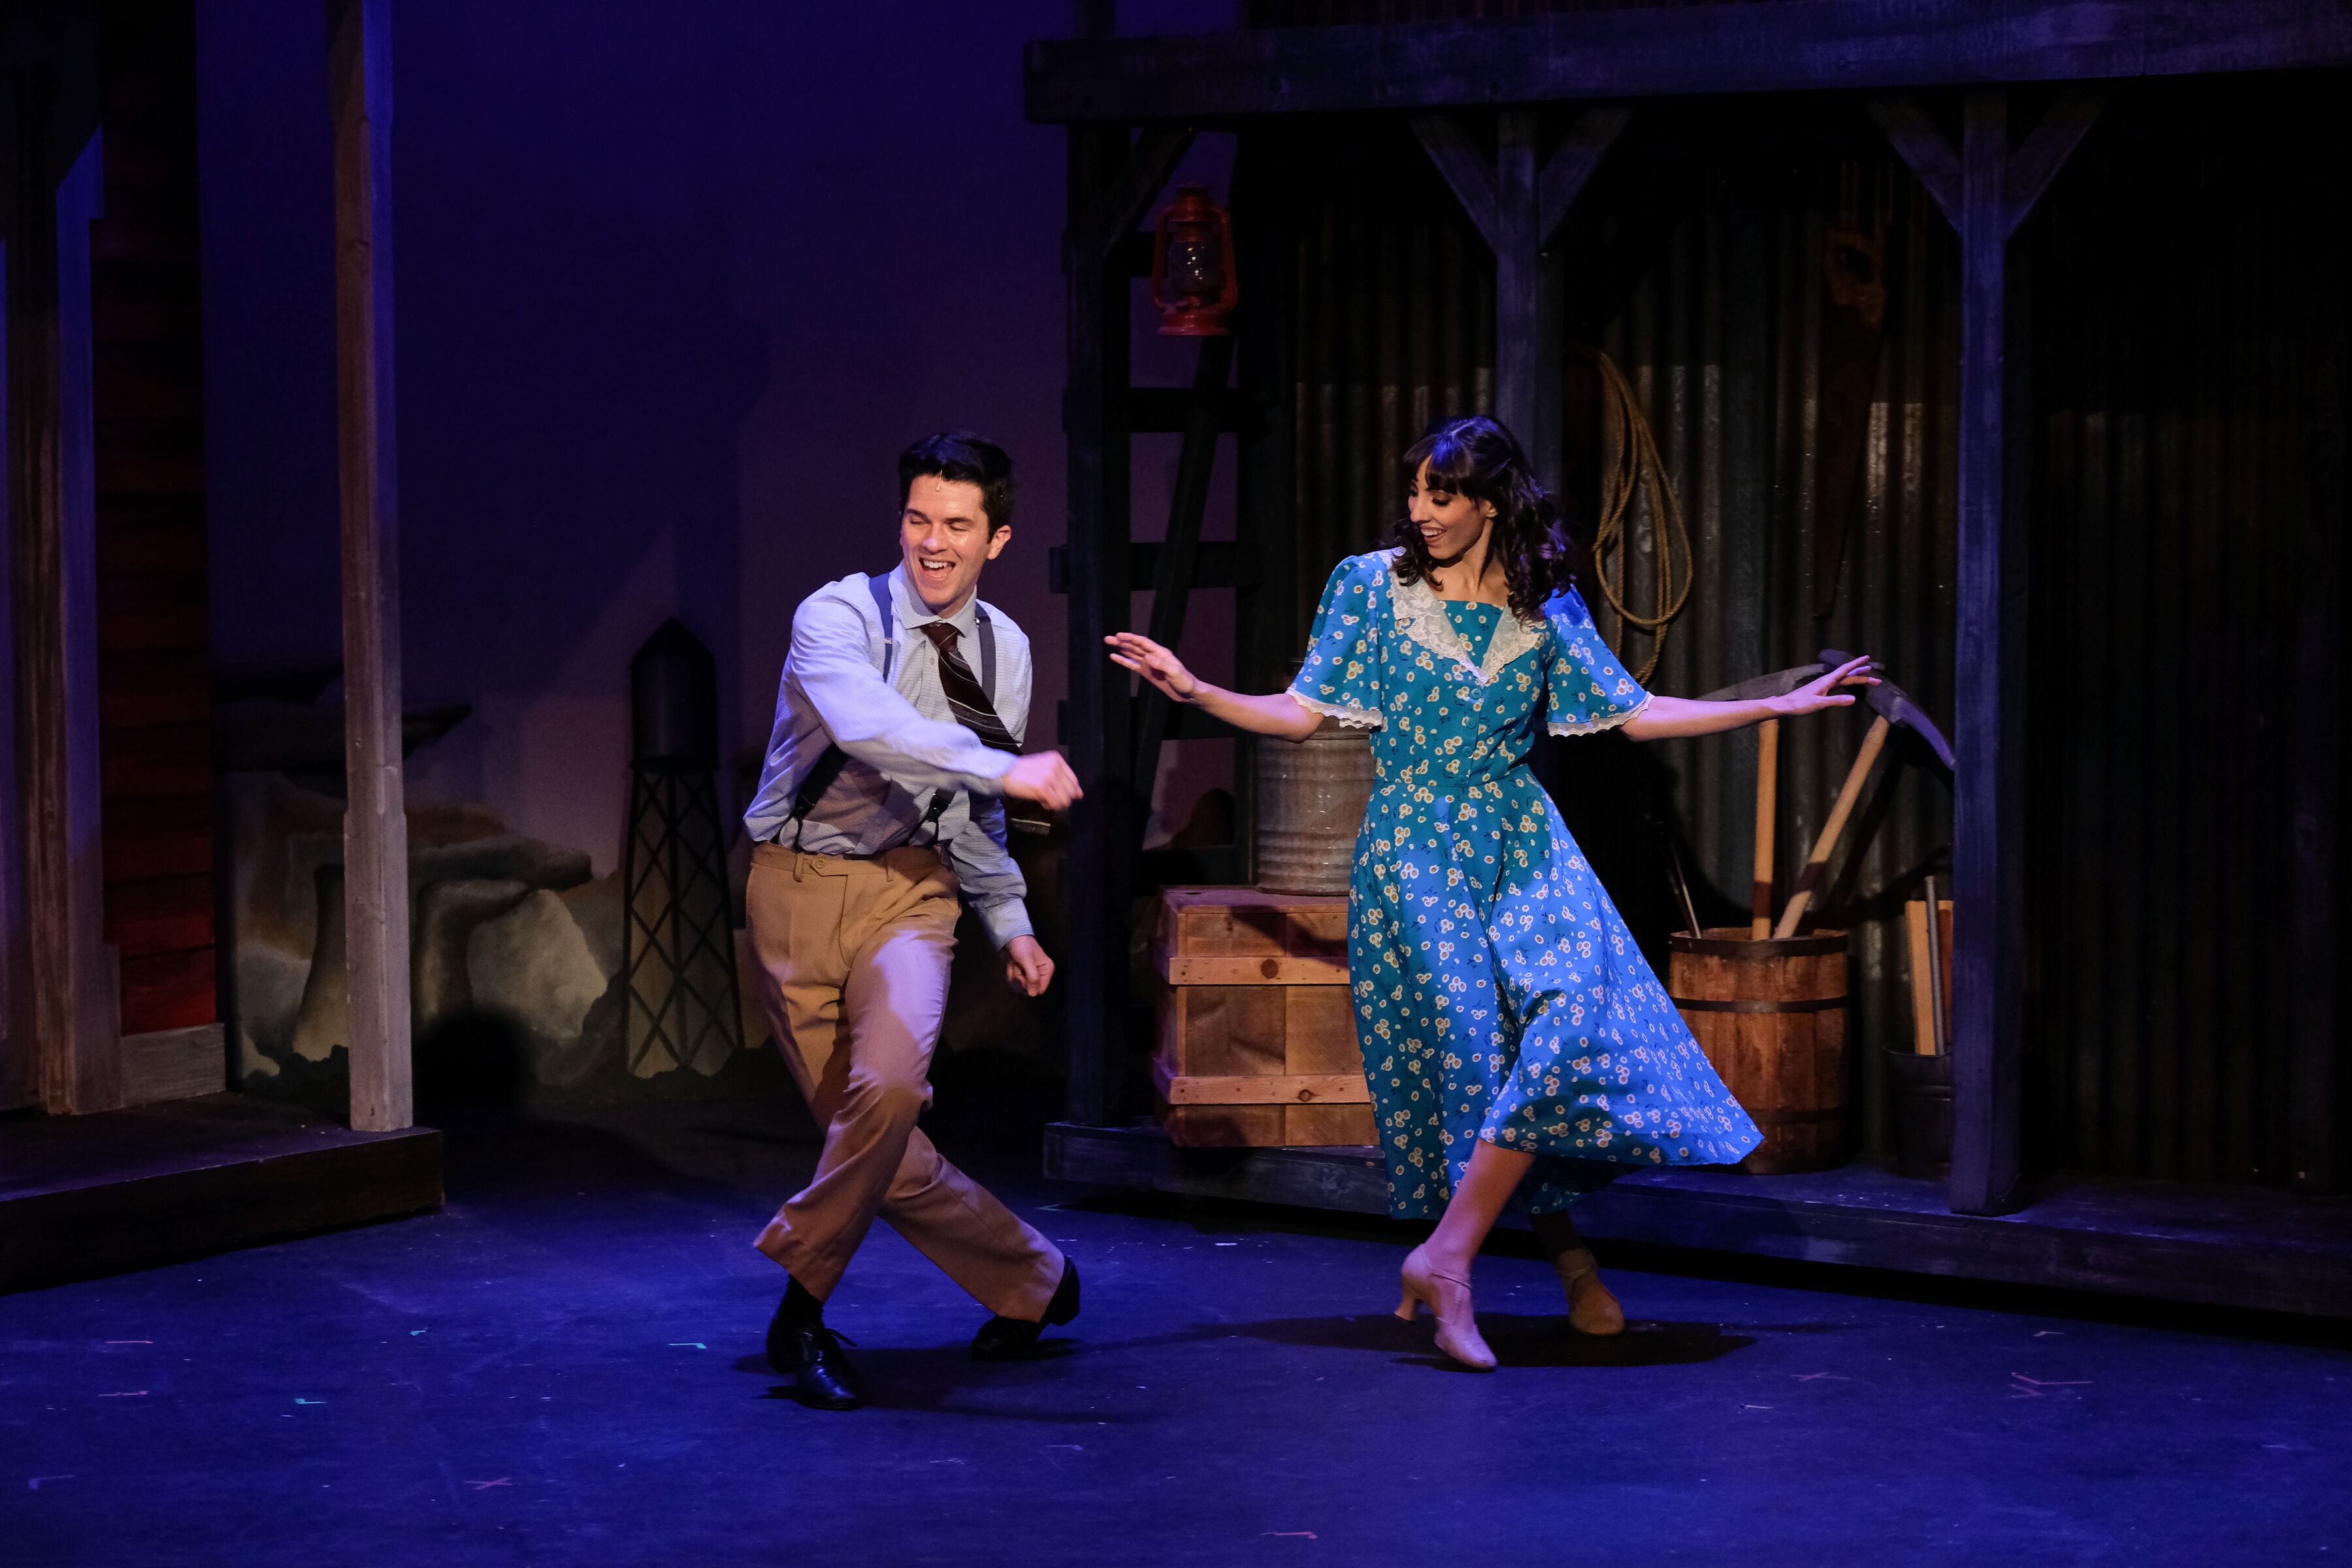 San Diego Broadway Shows: Visit Our Theatre To See “Crazy For You” Today